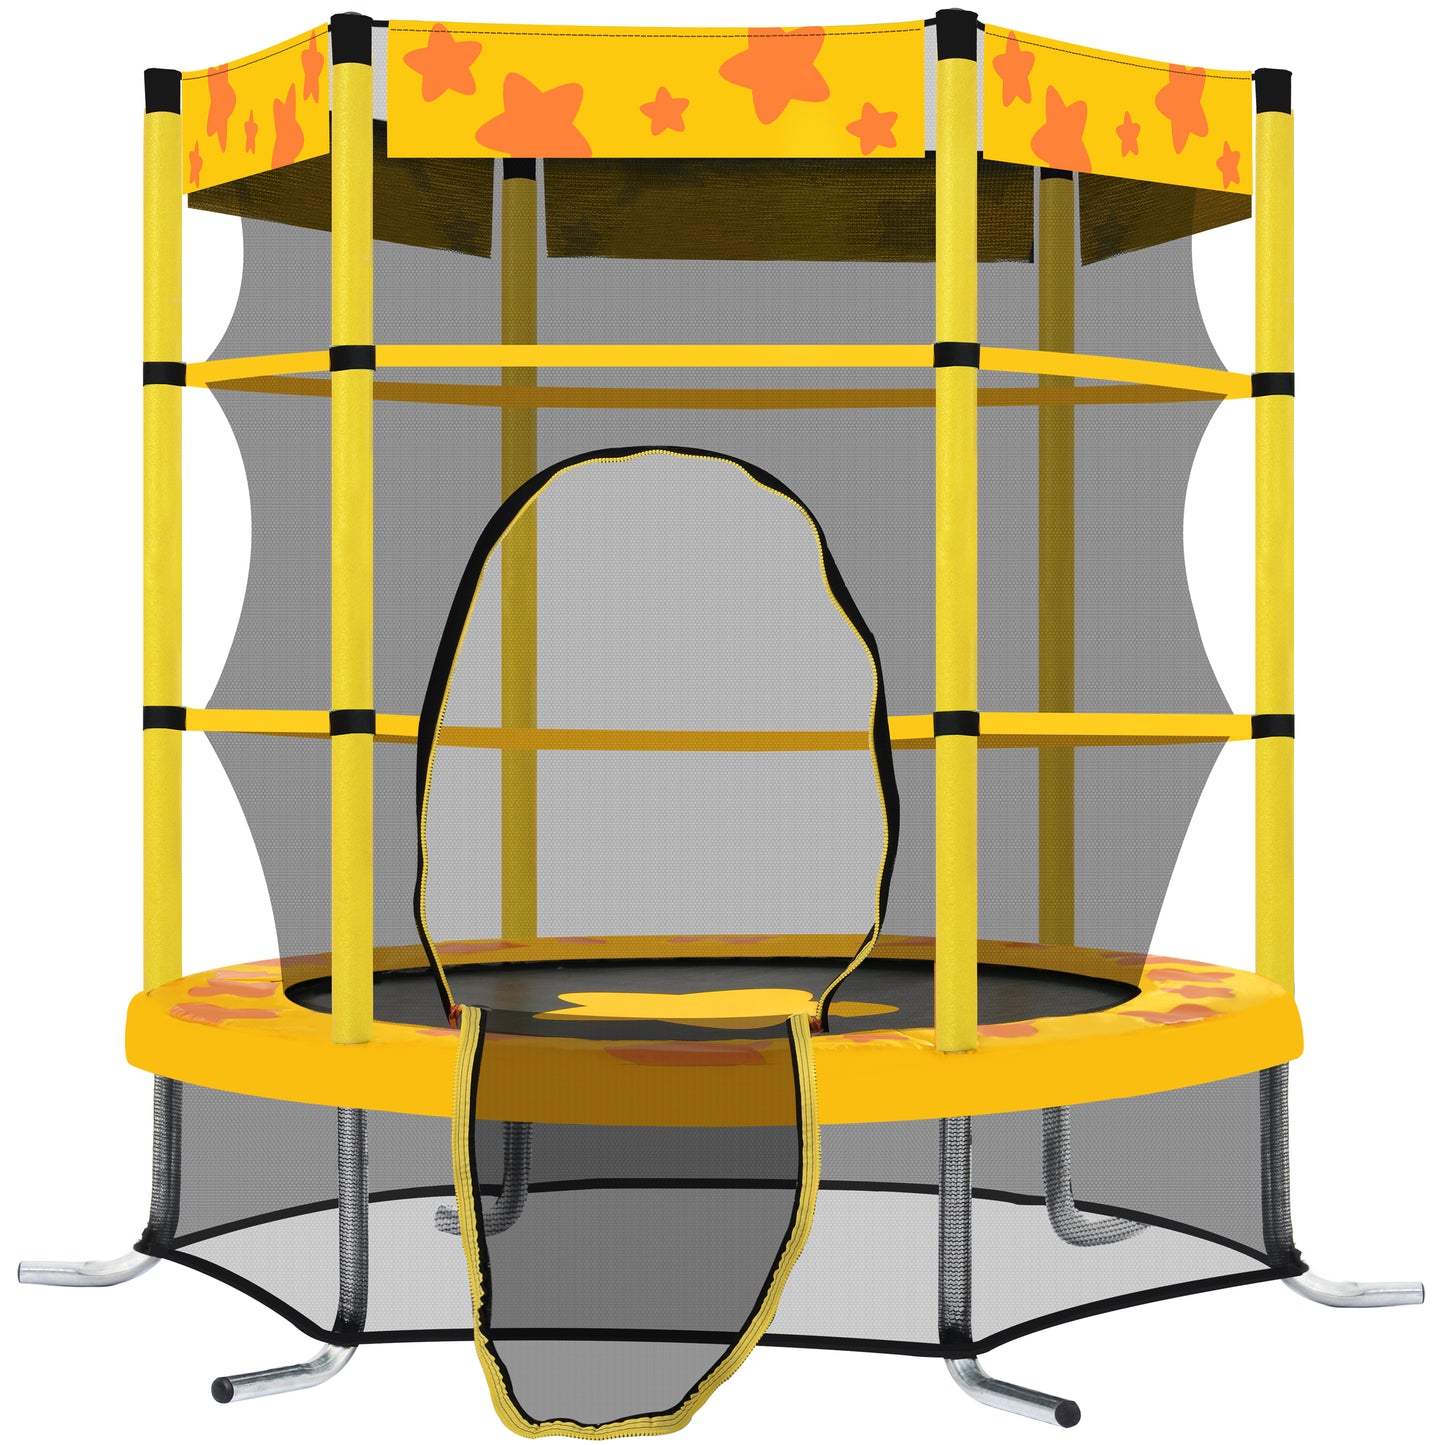 55 Inch Kids Trampoline with Safety Enclosure Net, 4.5FT Outdoor Indoor Trampoline for Kids (Yellow)